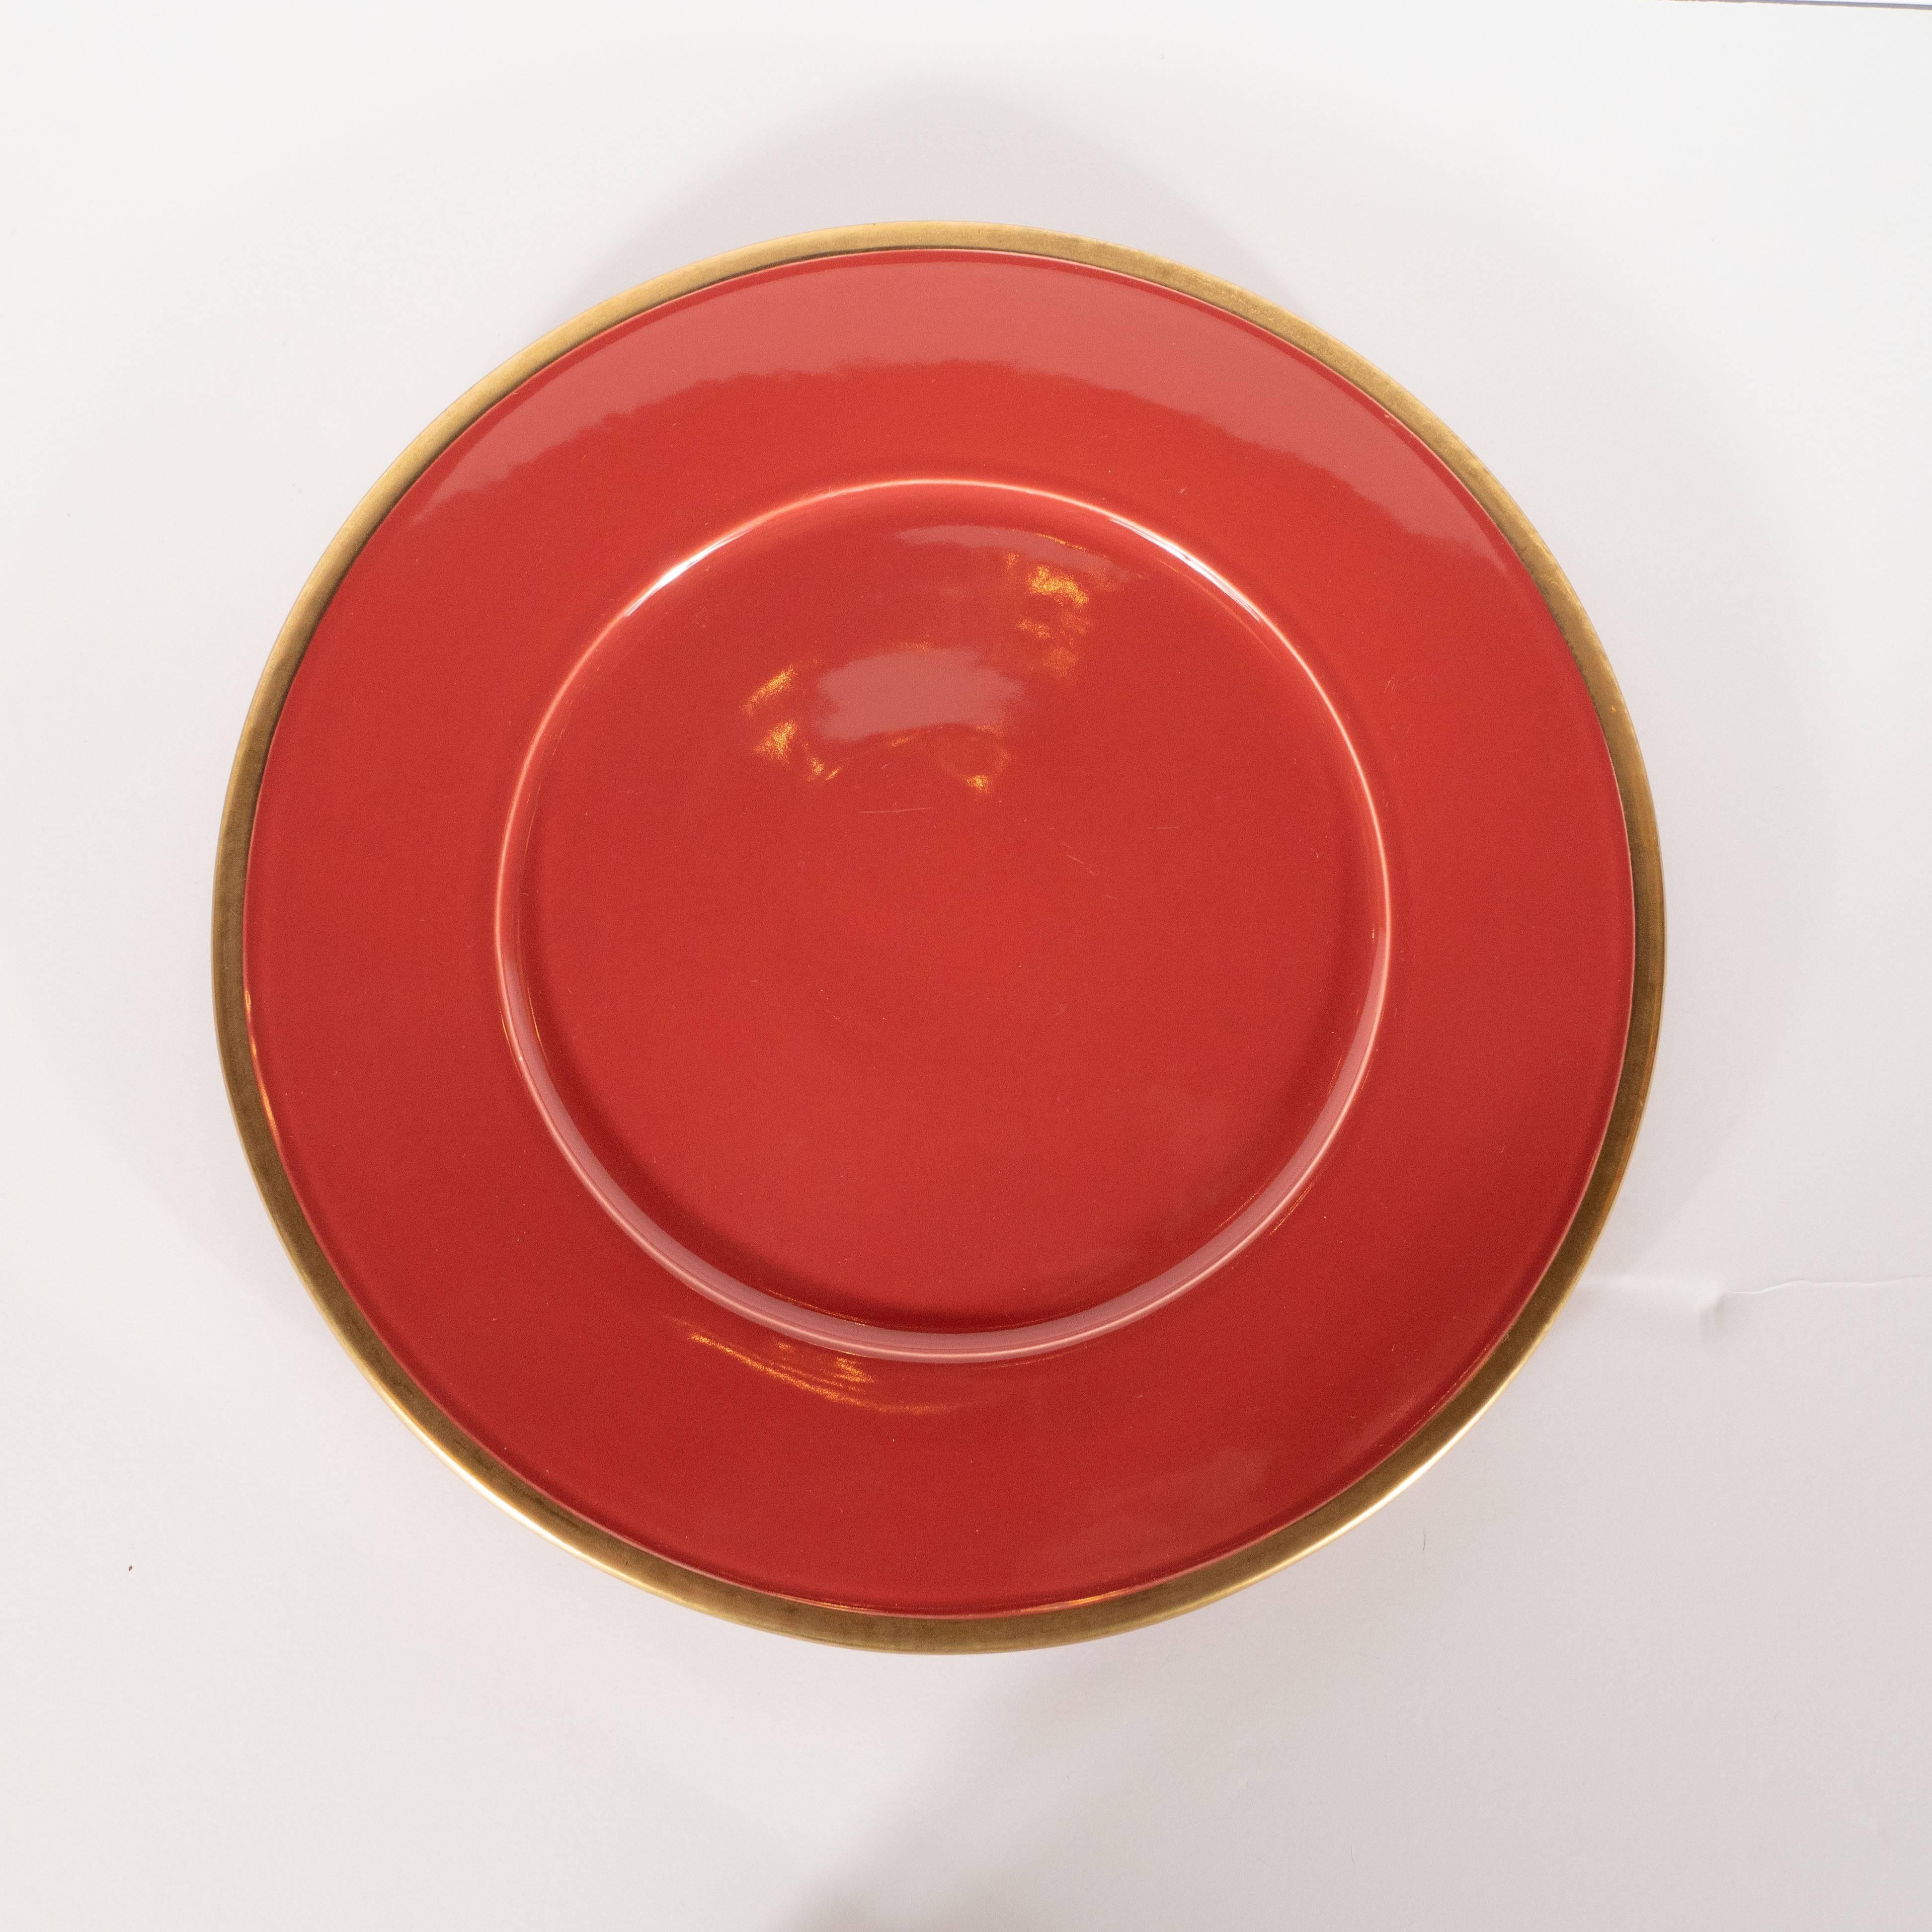 These fine modernist porcelain plates were realized by the esteemed British ceramic studio, Maryse Boxer, circa 1990. Realized in a refined carnelian, they offer slightly recessed centers and 24-karat gold rims. The bottom features two concentric